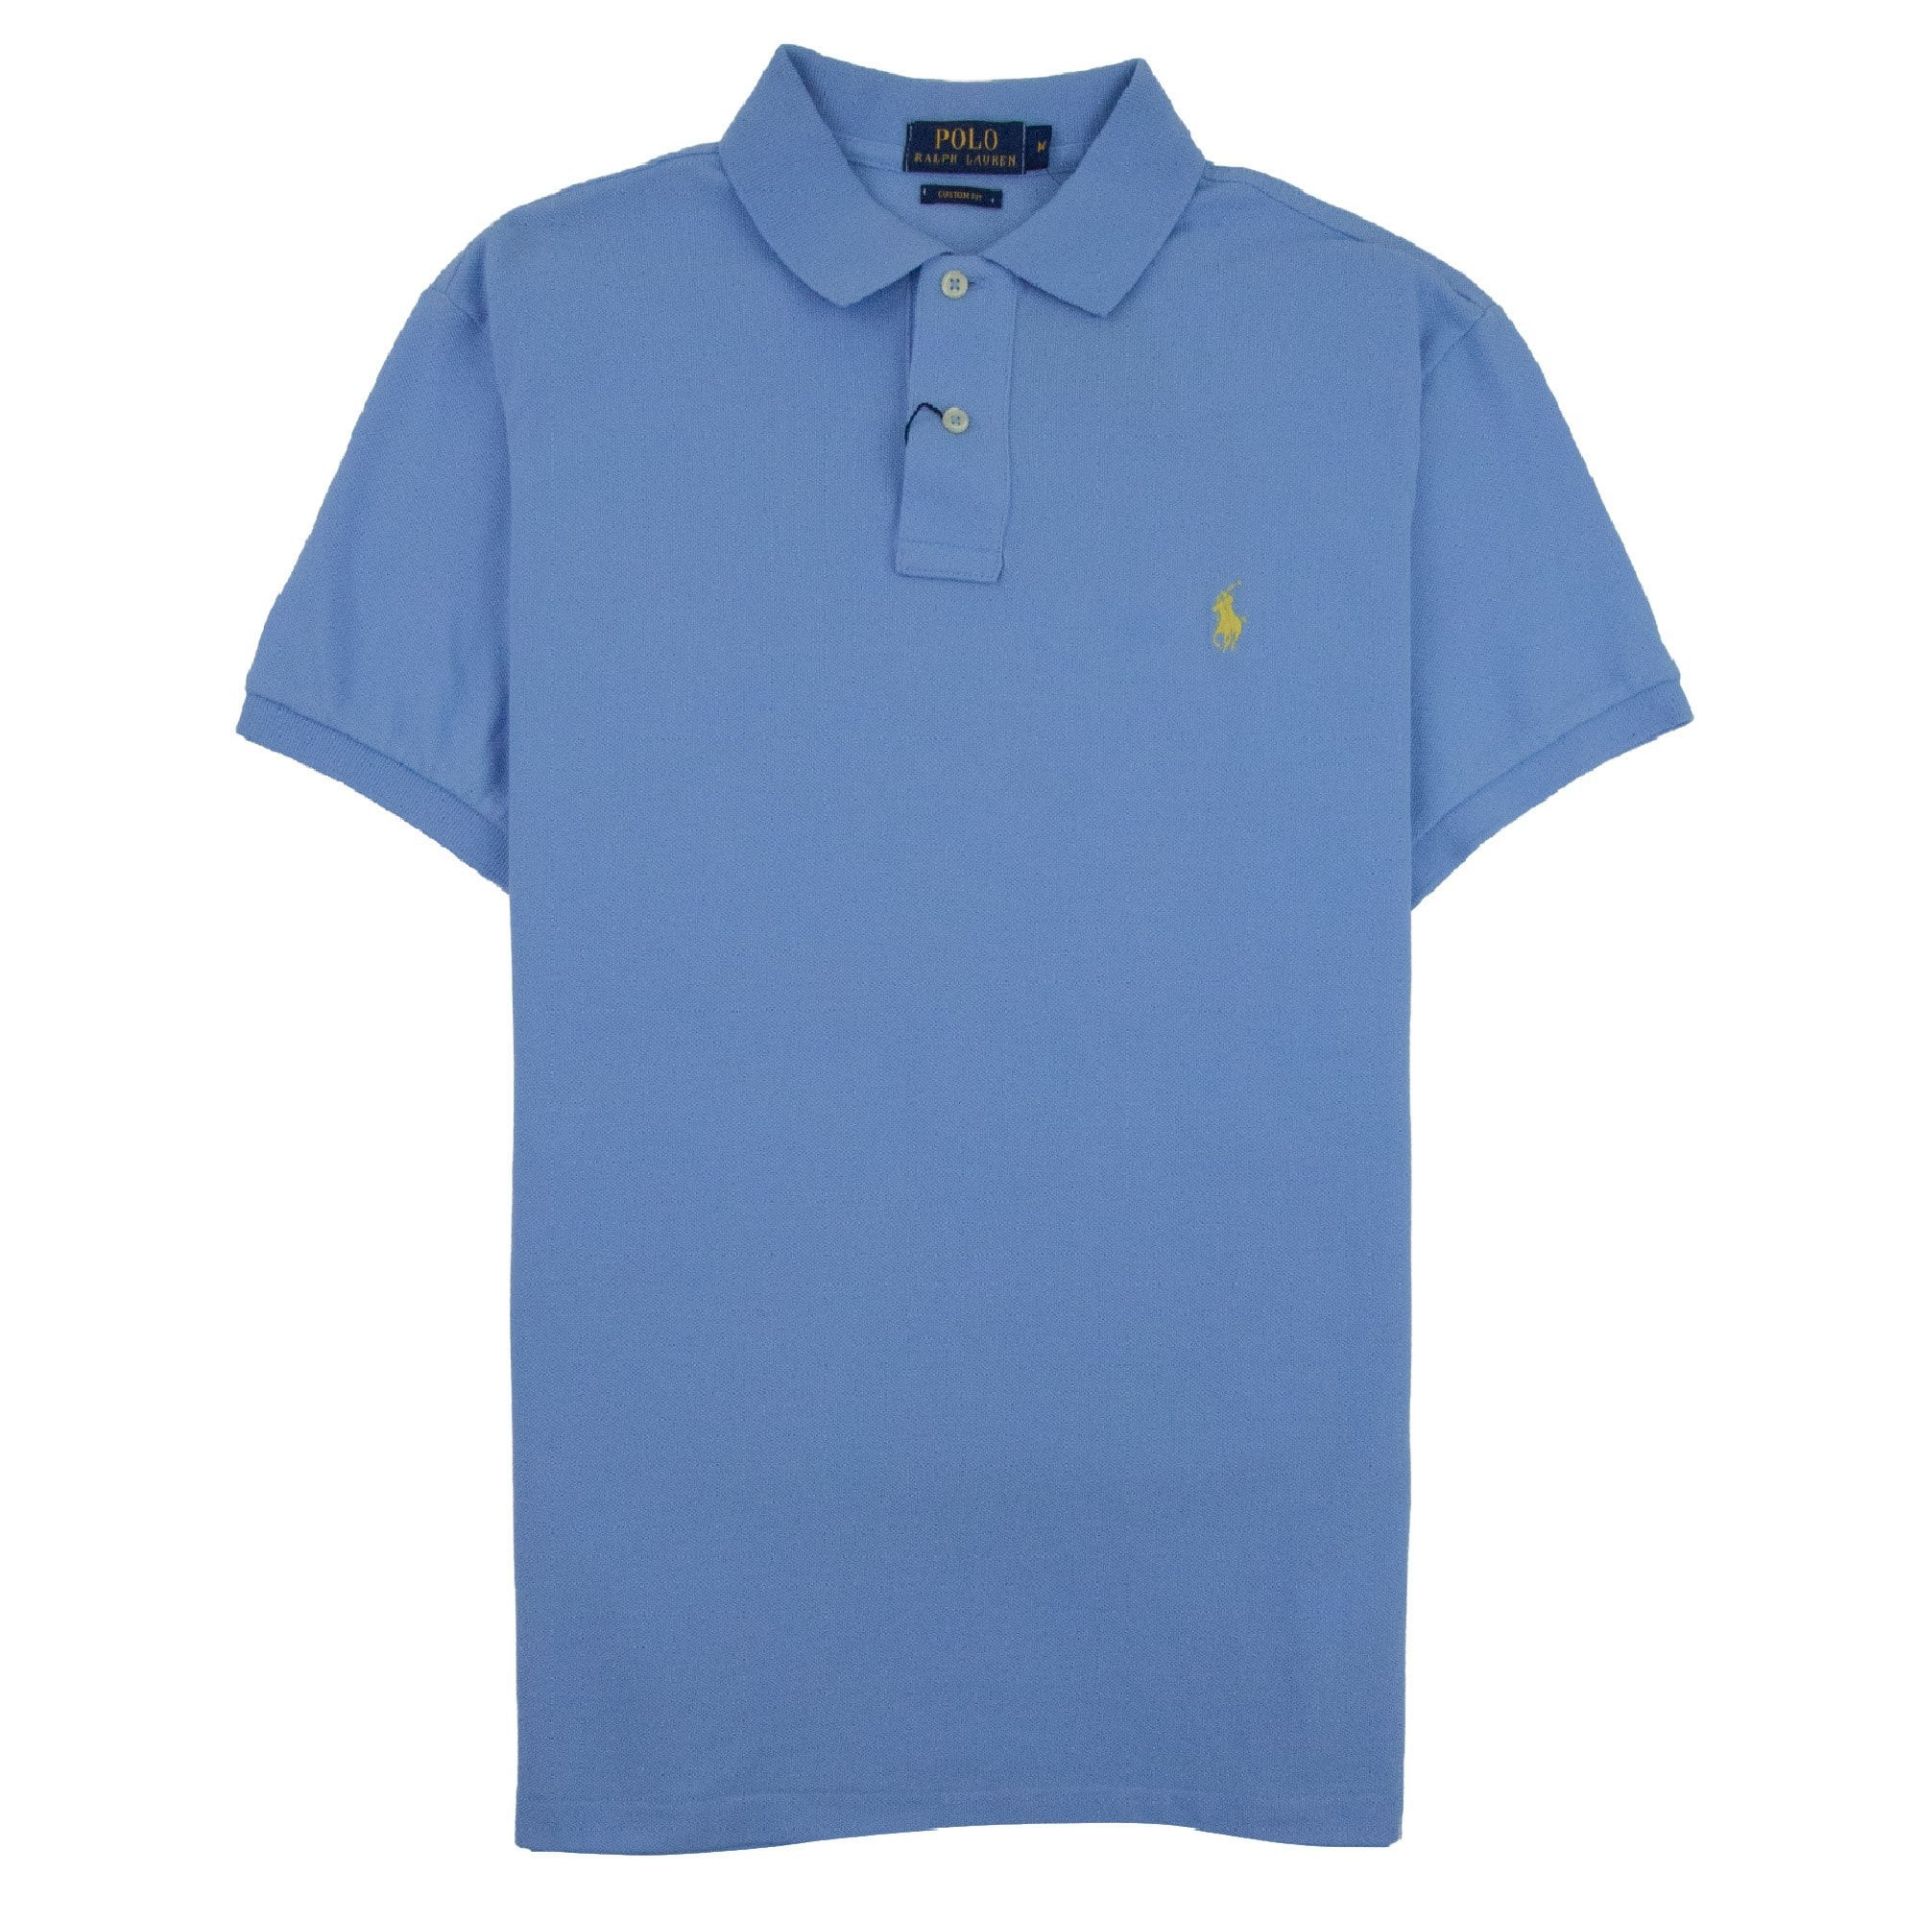 + VAT Brand New Ralph Lauren Custom-Fit Small Pony Polo Shirt - Chatham Blue - Size XL - Ribbed